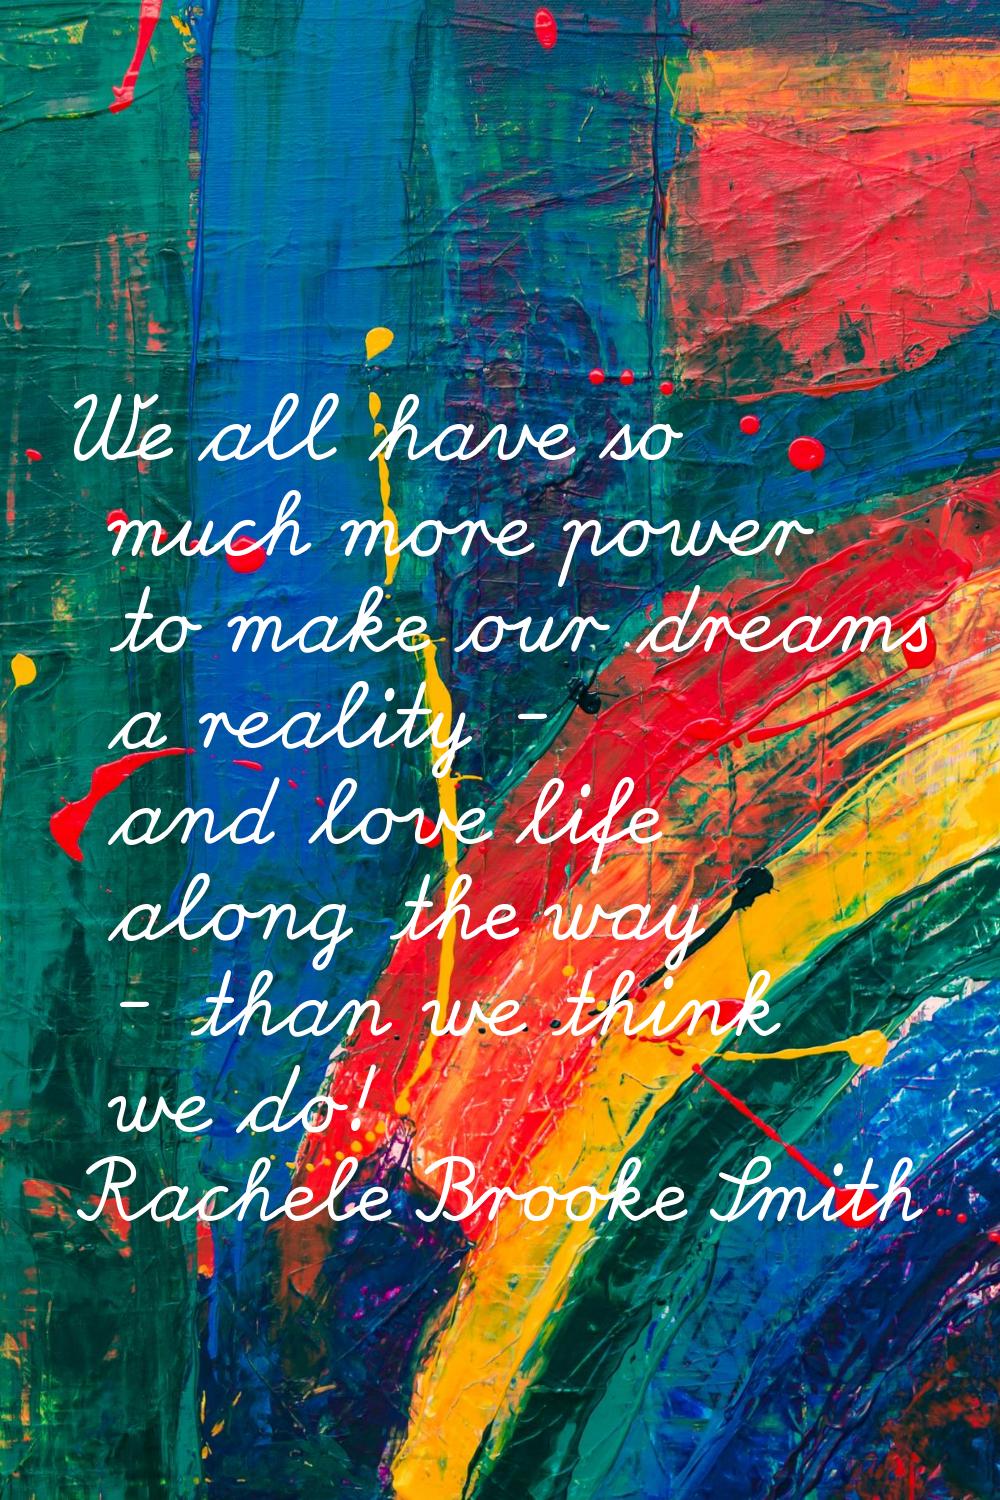 We all have so much more power to make our dreams a reality - and love life along the way - than we